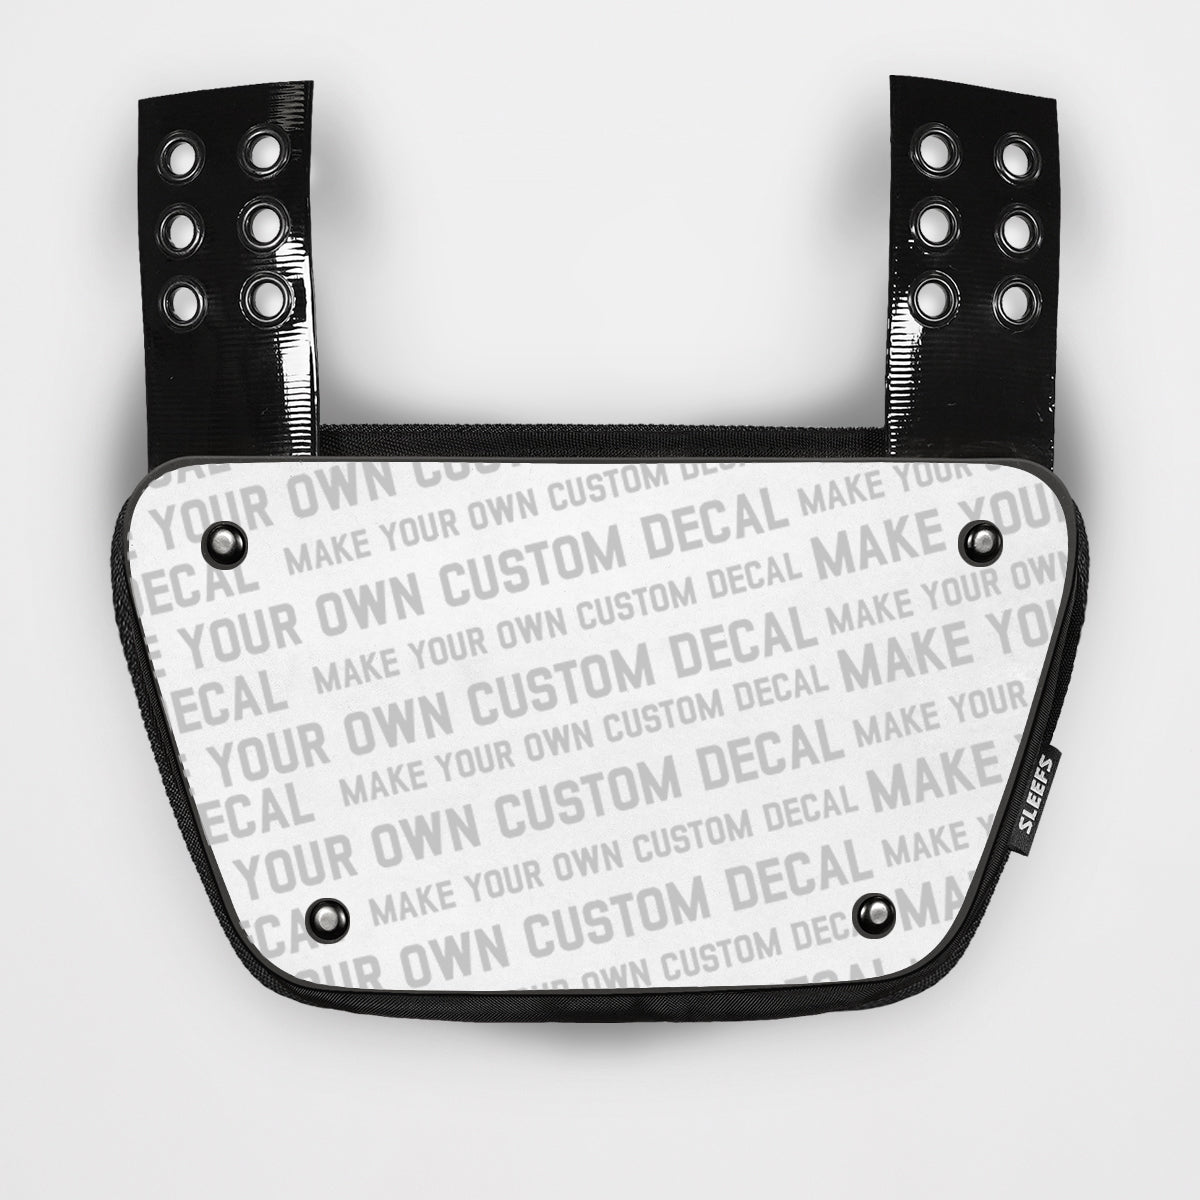 Shop Football Backplates For Adult & Youth